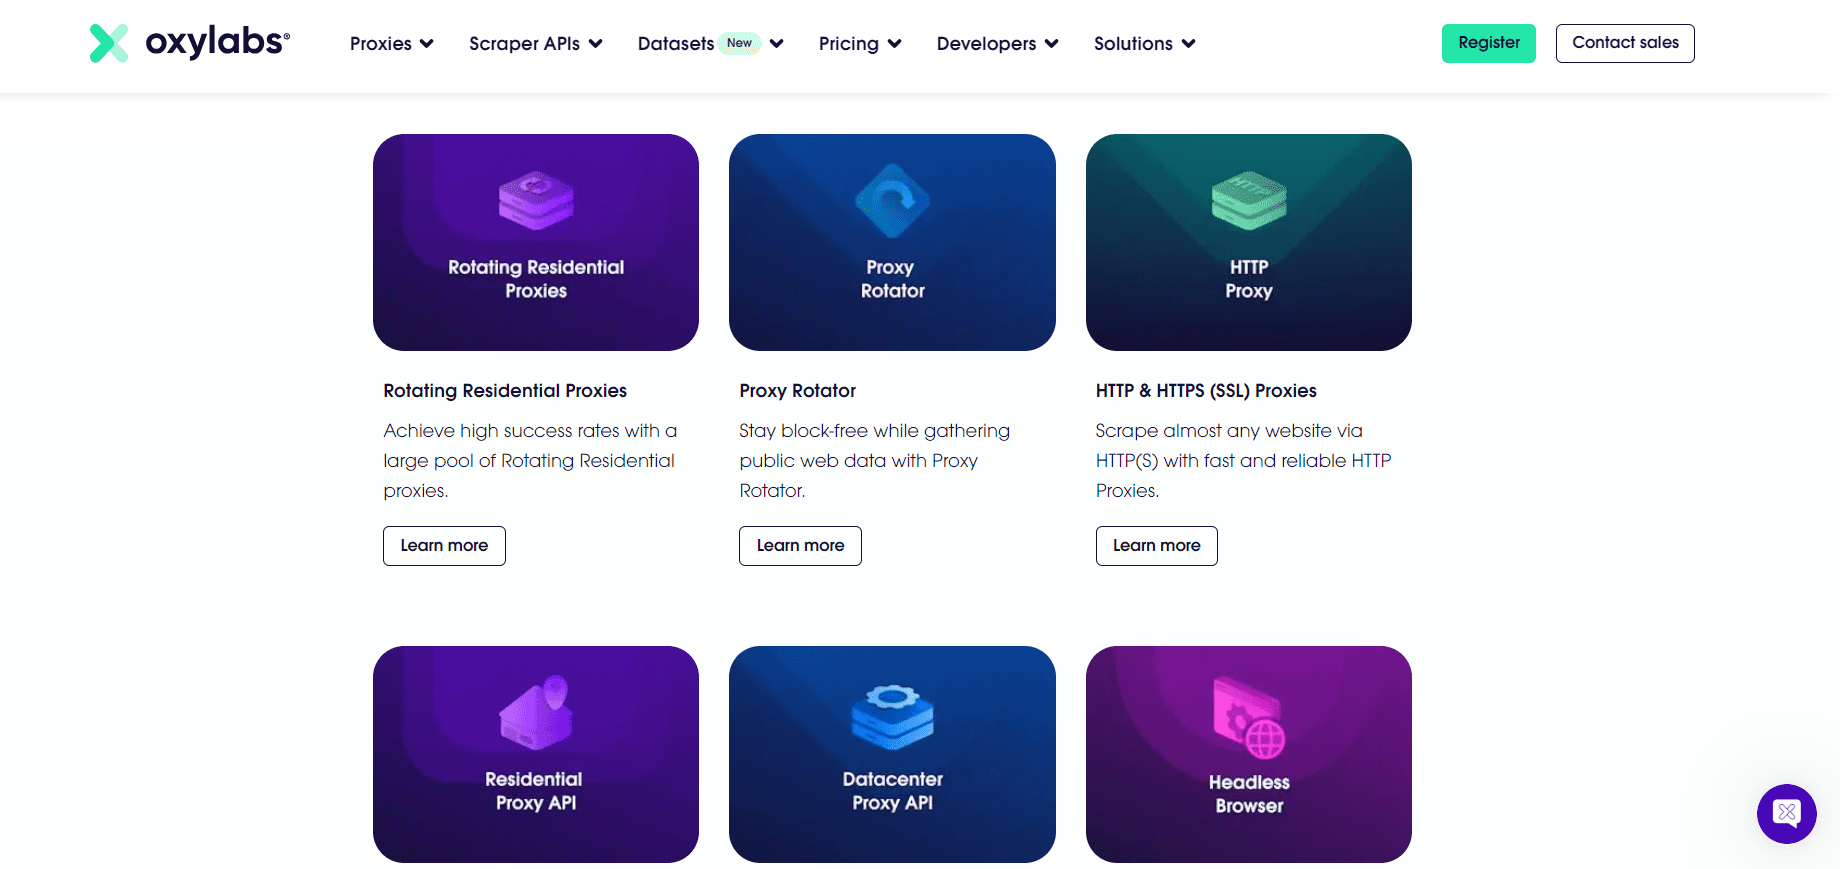 Oxylabs Features